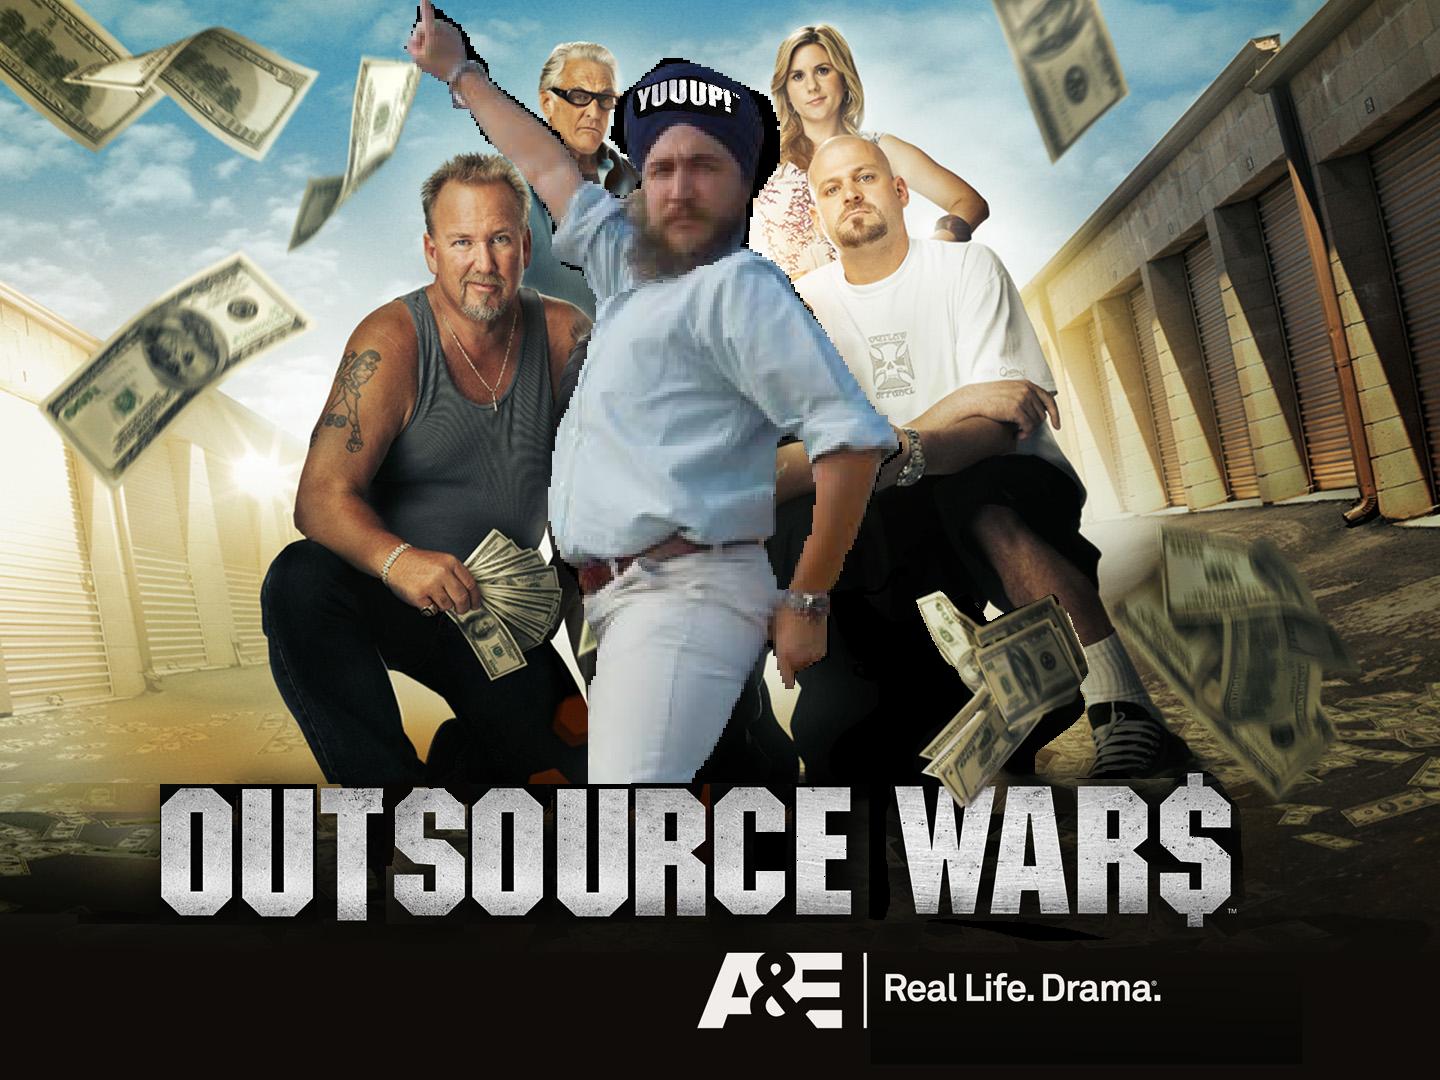 Curry Outsource Wars